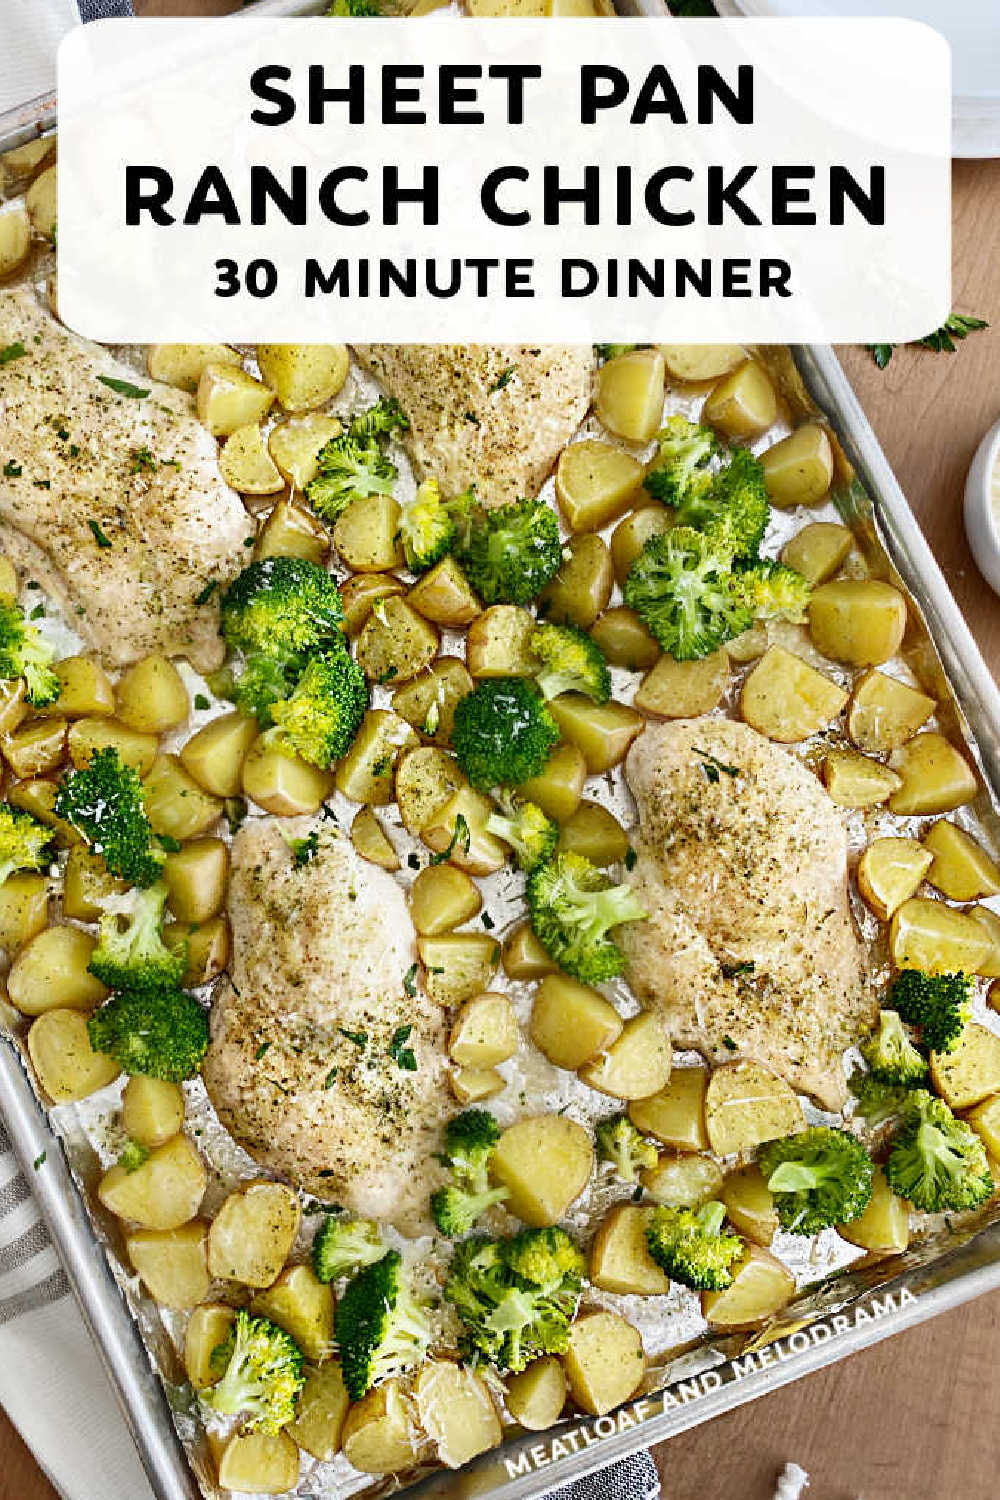 One Pan Baked Ranch Chicken Dinner is an easy recipe for chicken and potatoes with broccoli and ranch seasoning cooked on a sheet pan. Your whole family will love this easy dinner that is perfect for busy weeknights! via @meamel